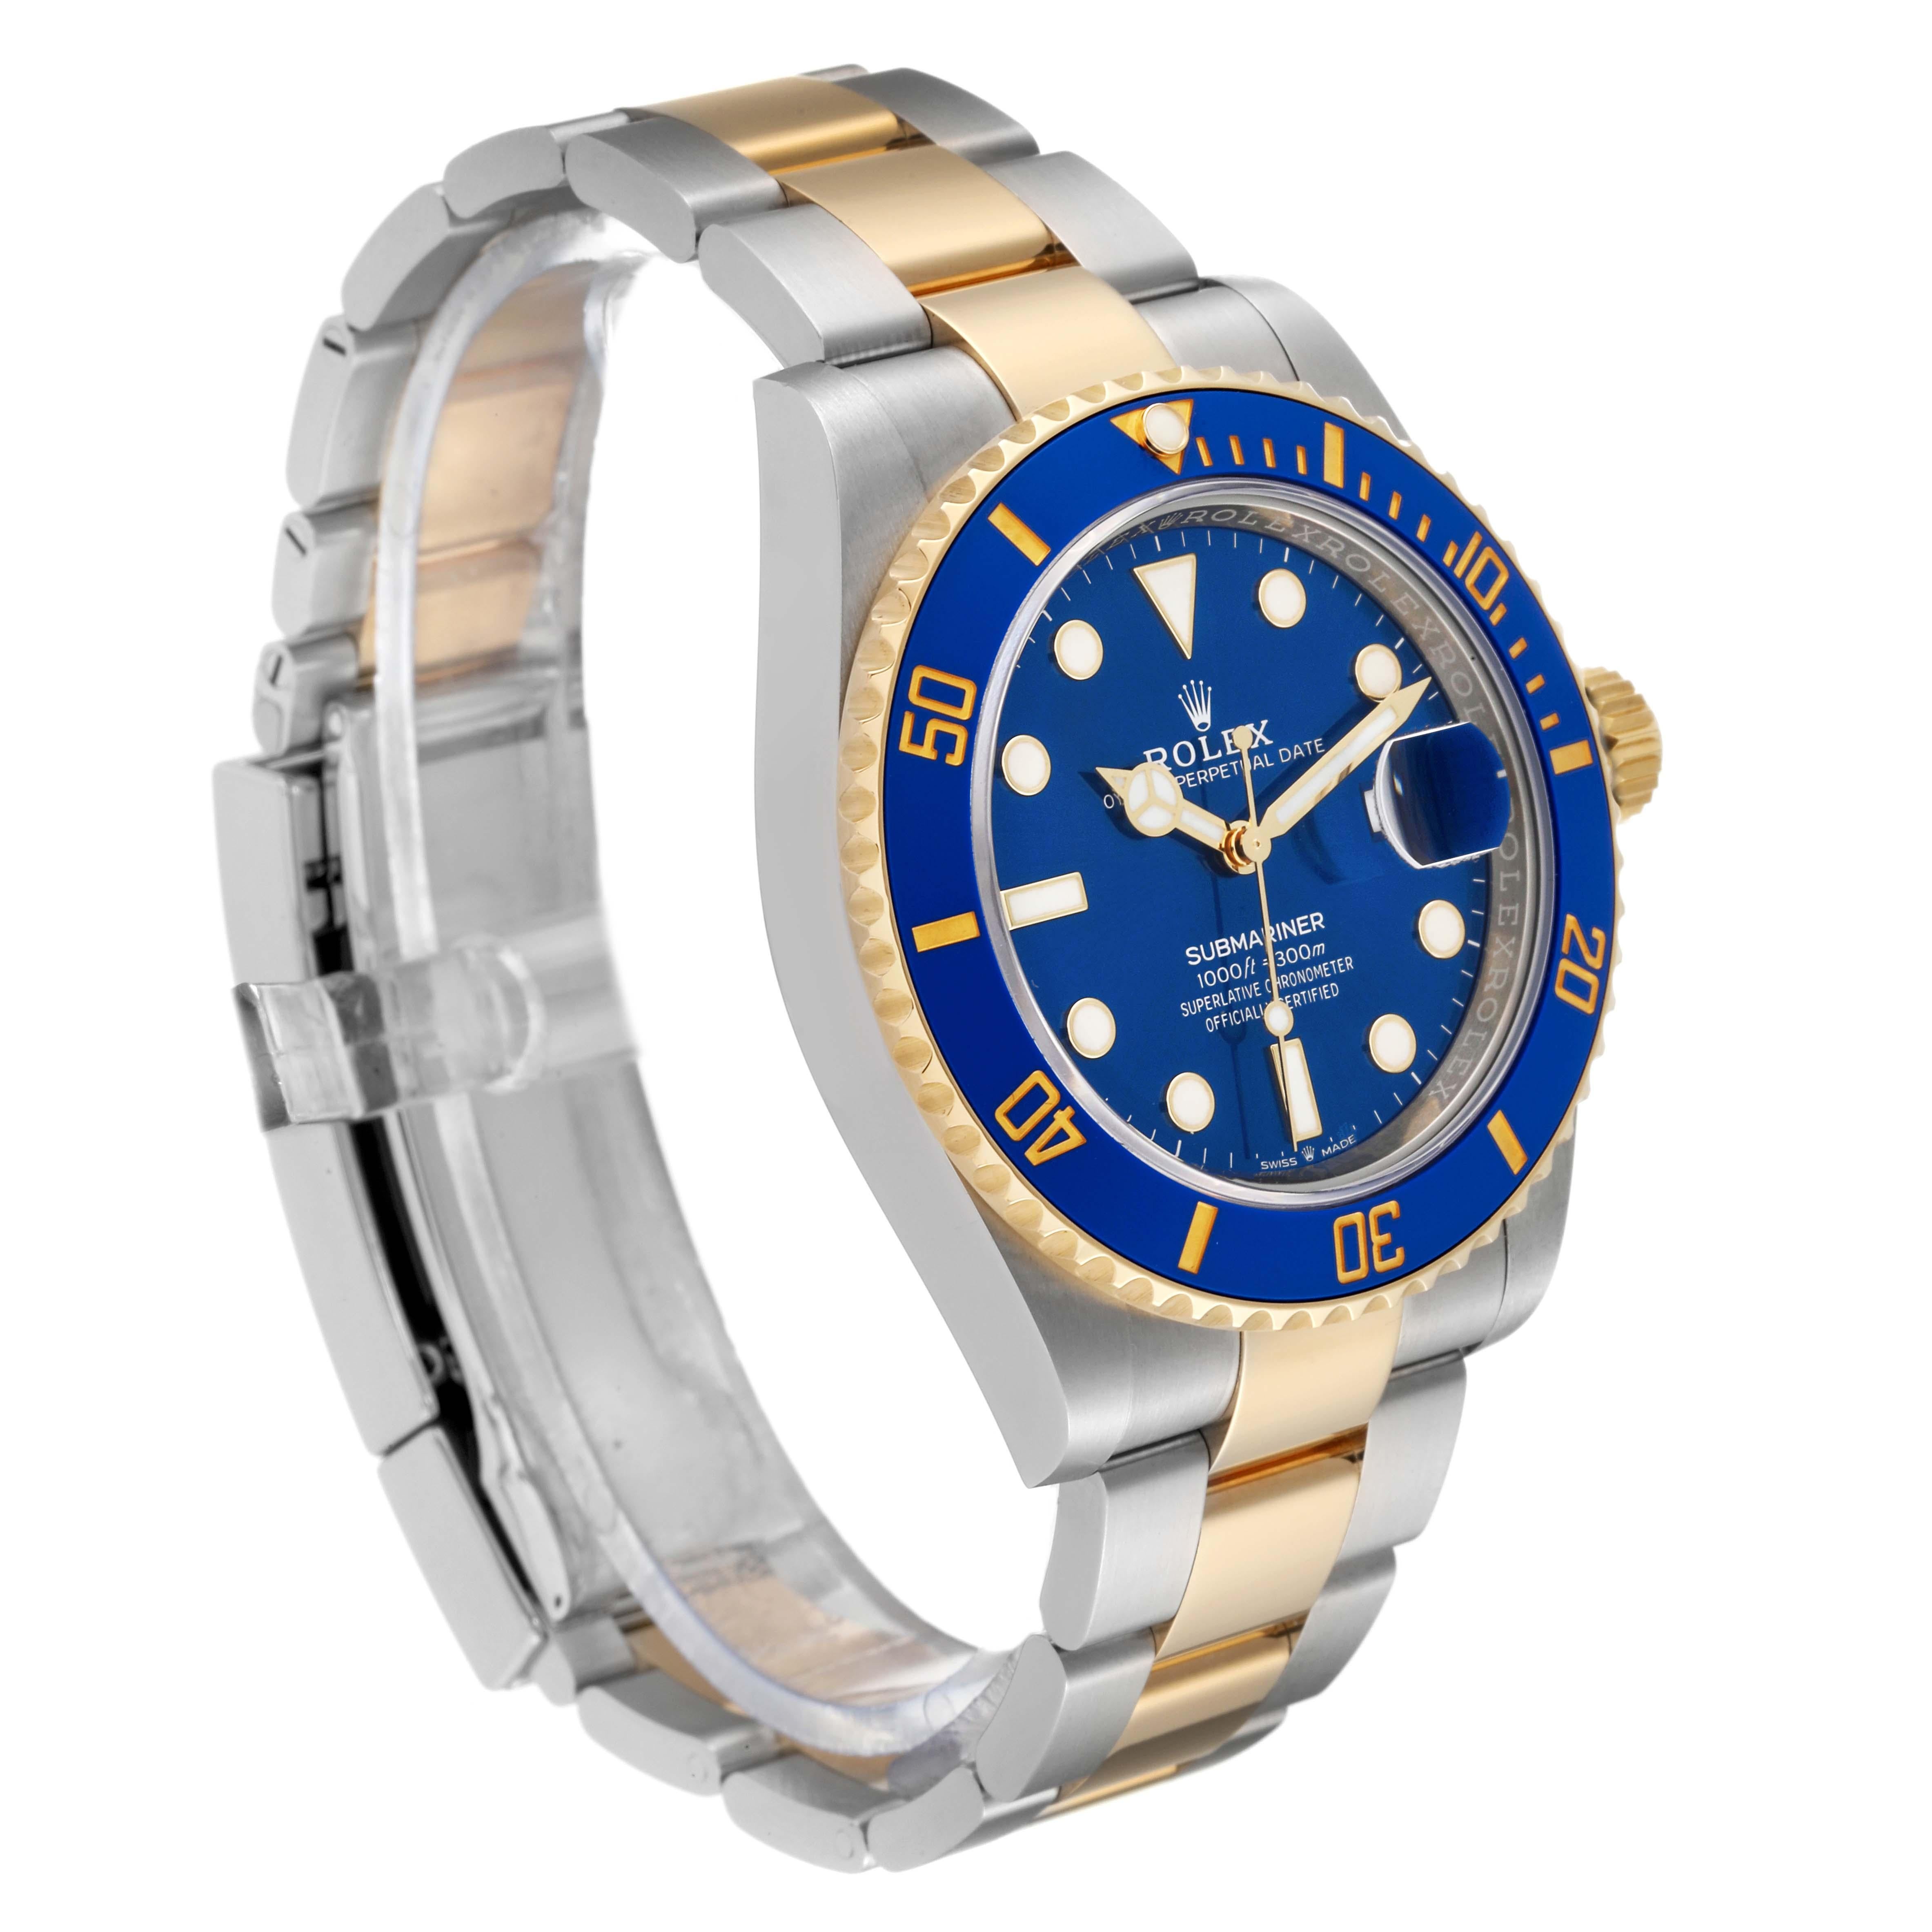 Rolex Submariner 41 Steel Yellow Gold Blue Dial Mens Watch 126613 Box Card In Excellent Condition For Sale In Atlanta, GA